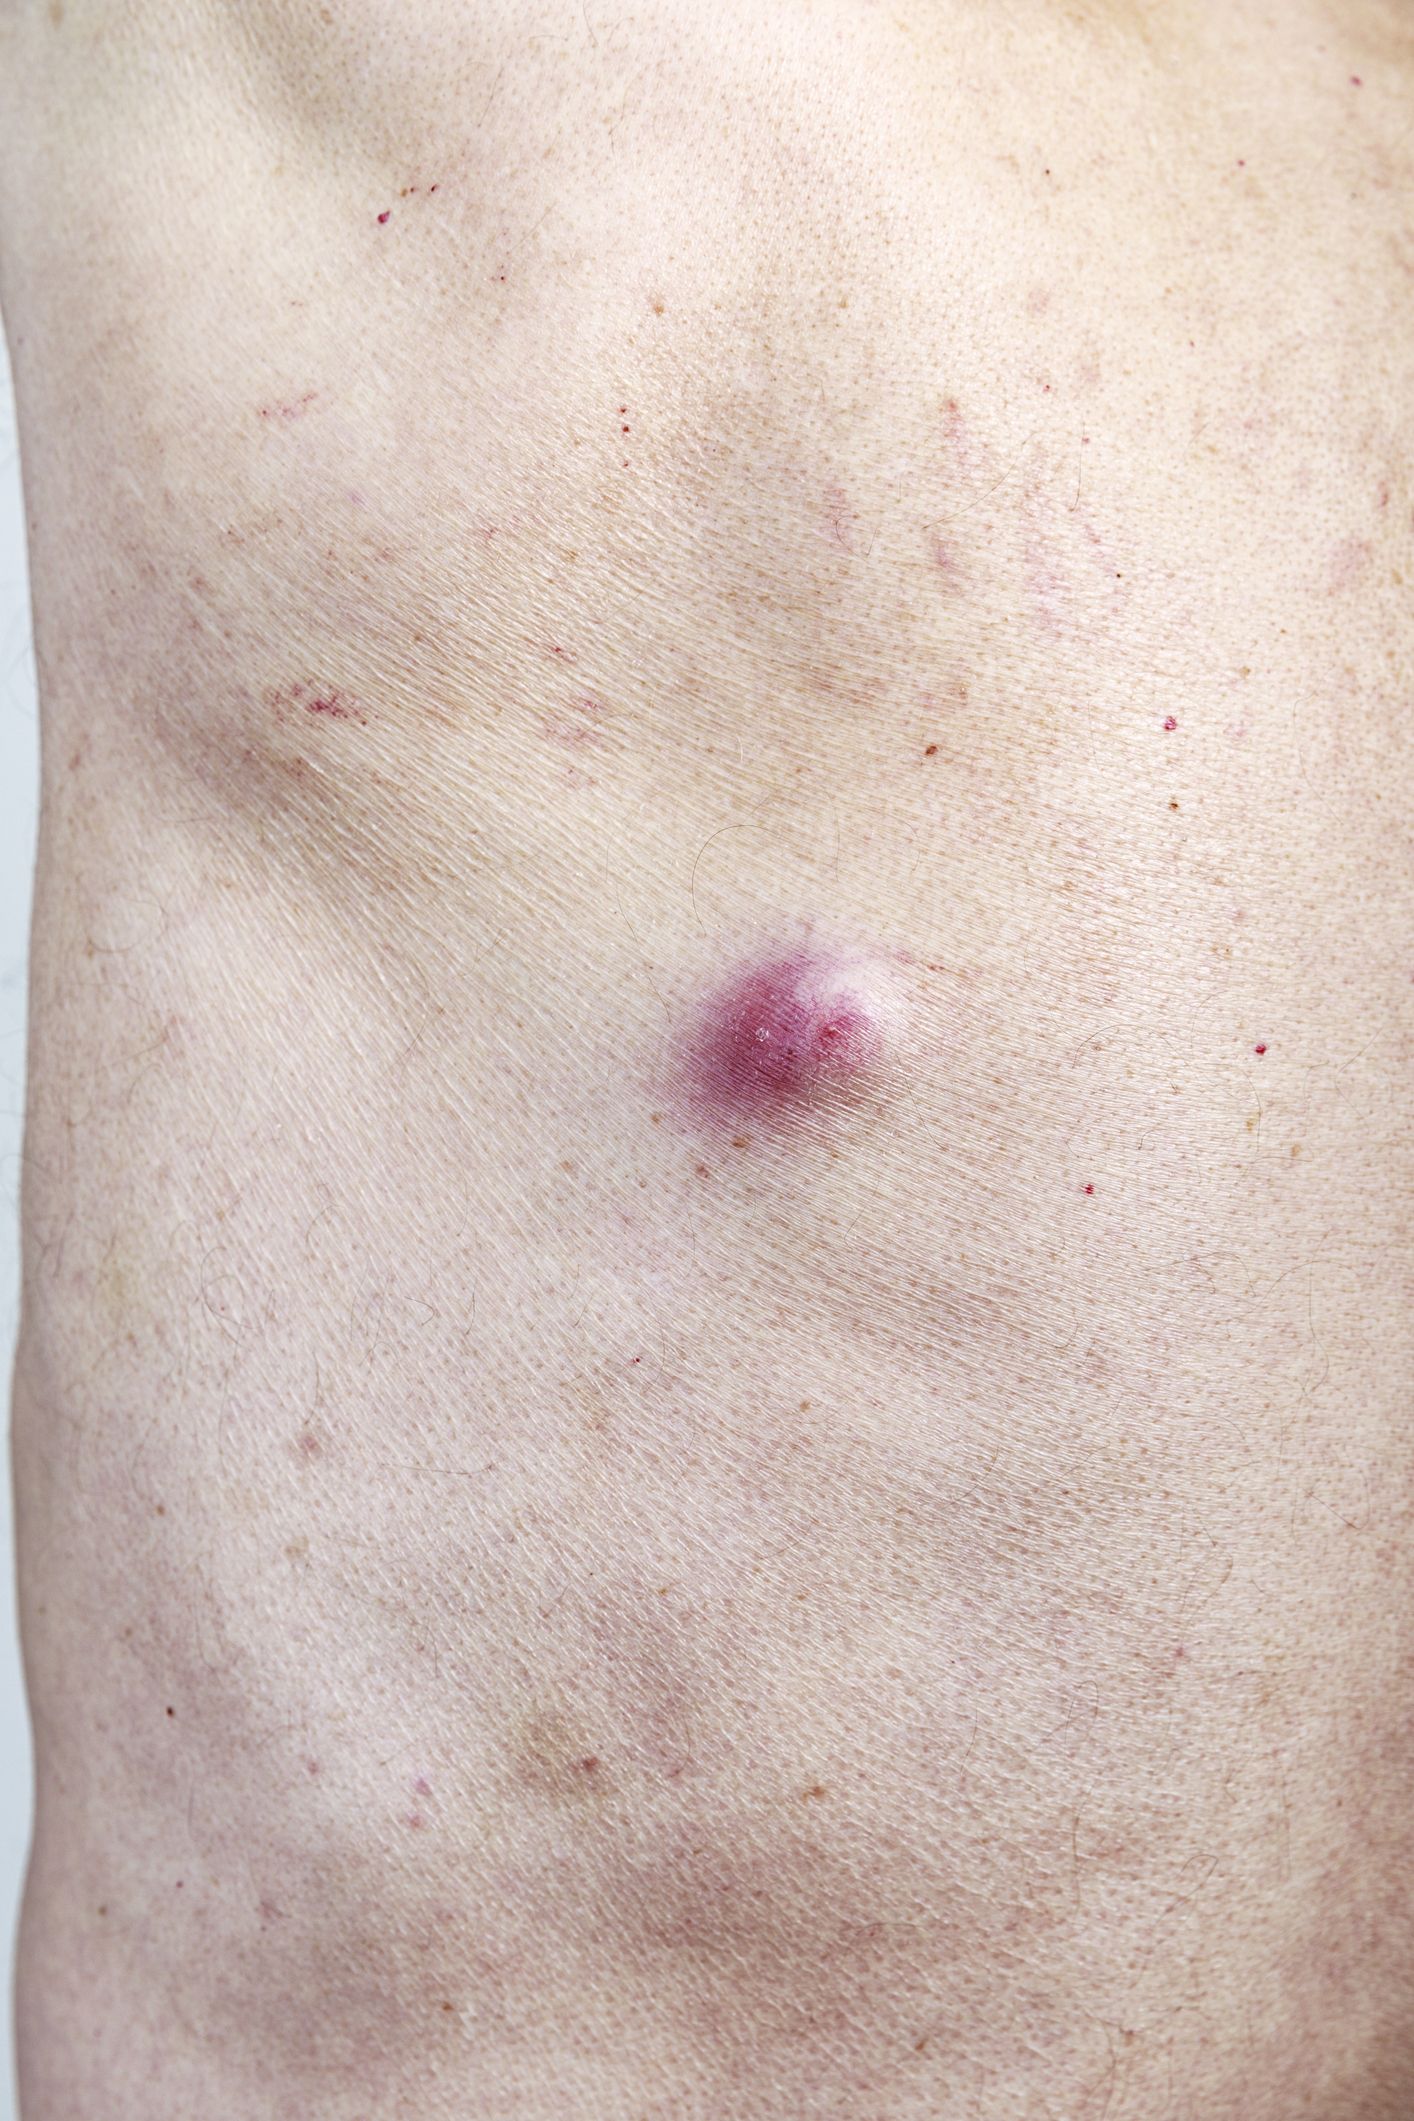 Pimple on stomach: Causes, treatment, and prevention